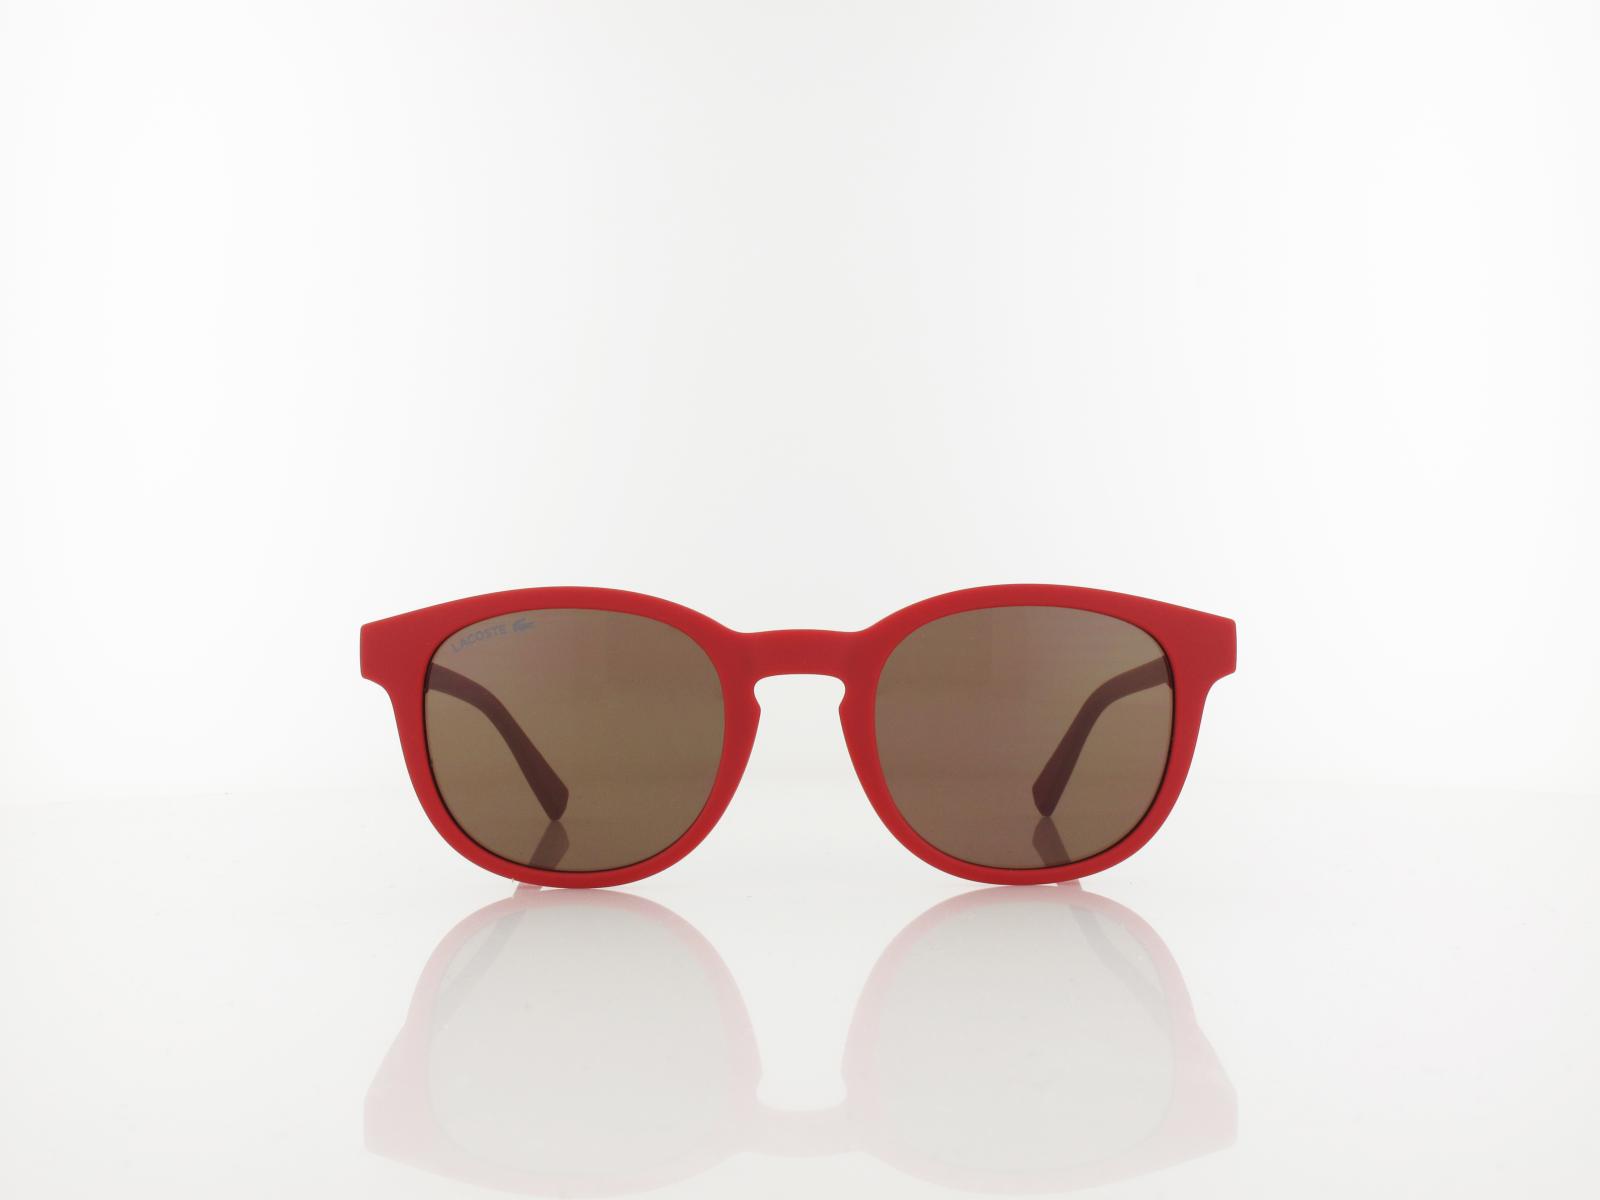 Lacoste | L3644S 615 48 | matte red / brown